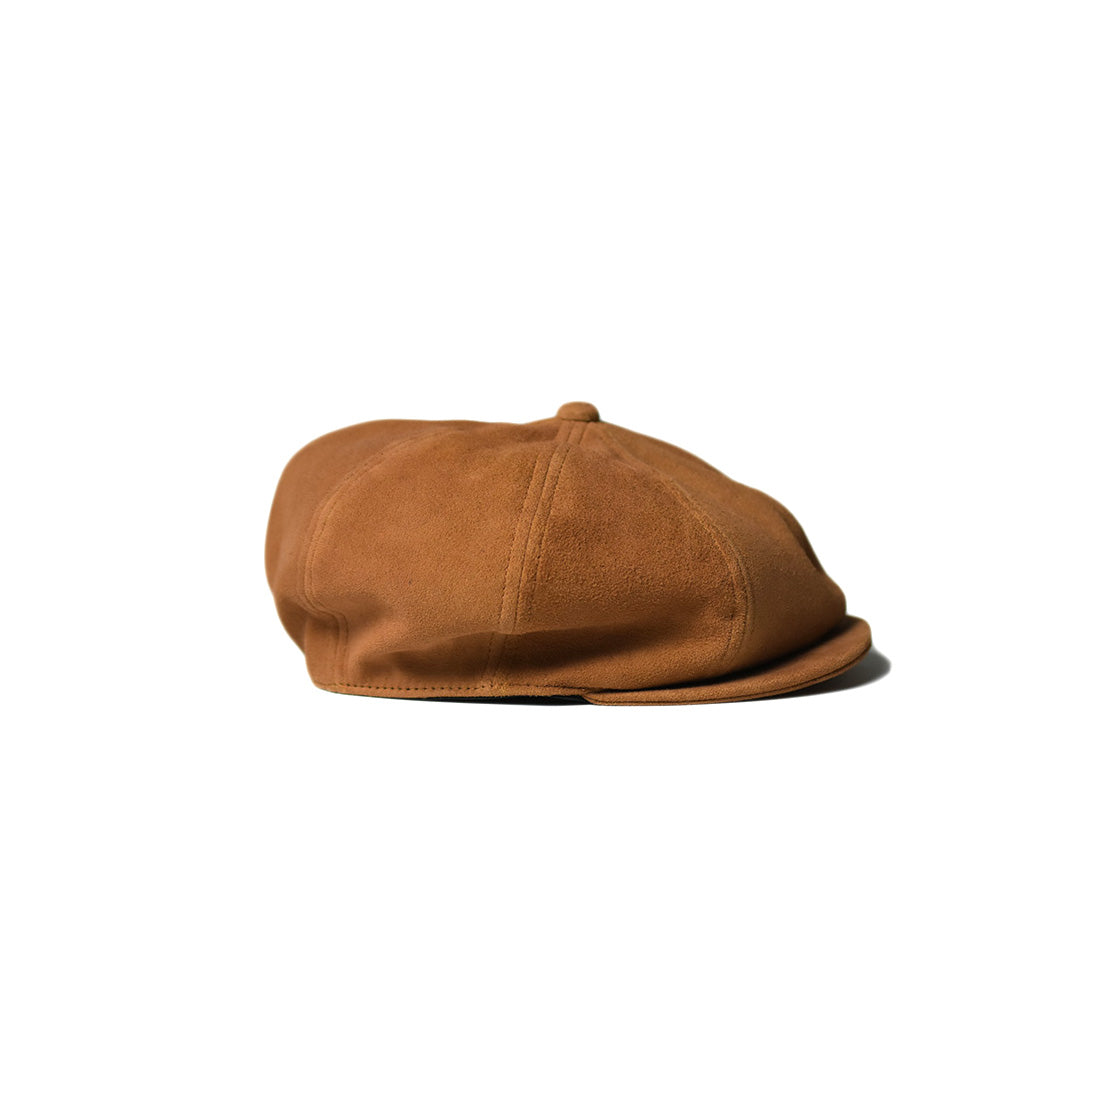 May club -【Addict Clothes】ACV-HG01L DEER SUEDE 8 PIECE CASQUETTE - MUSTARD